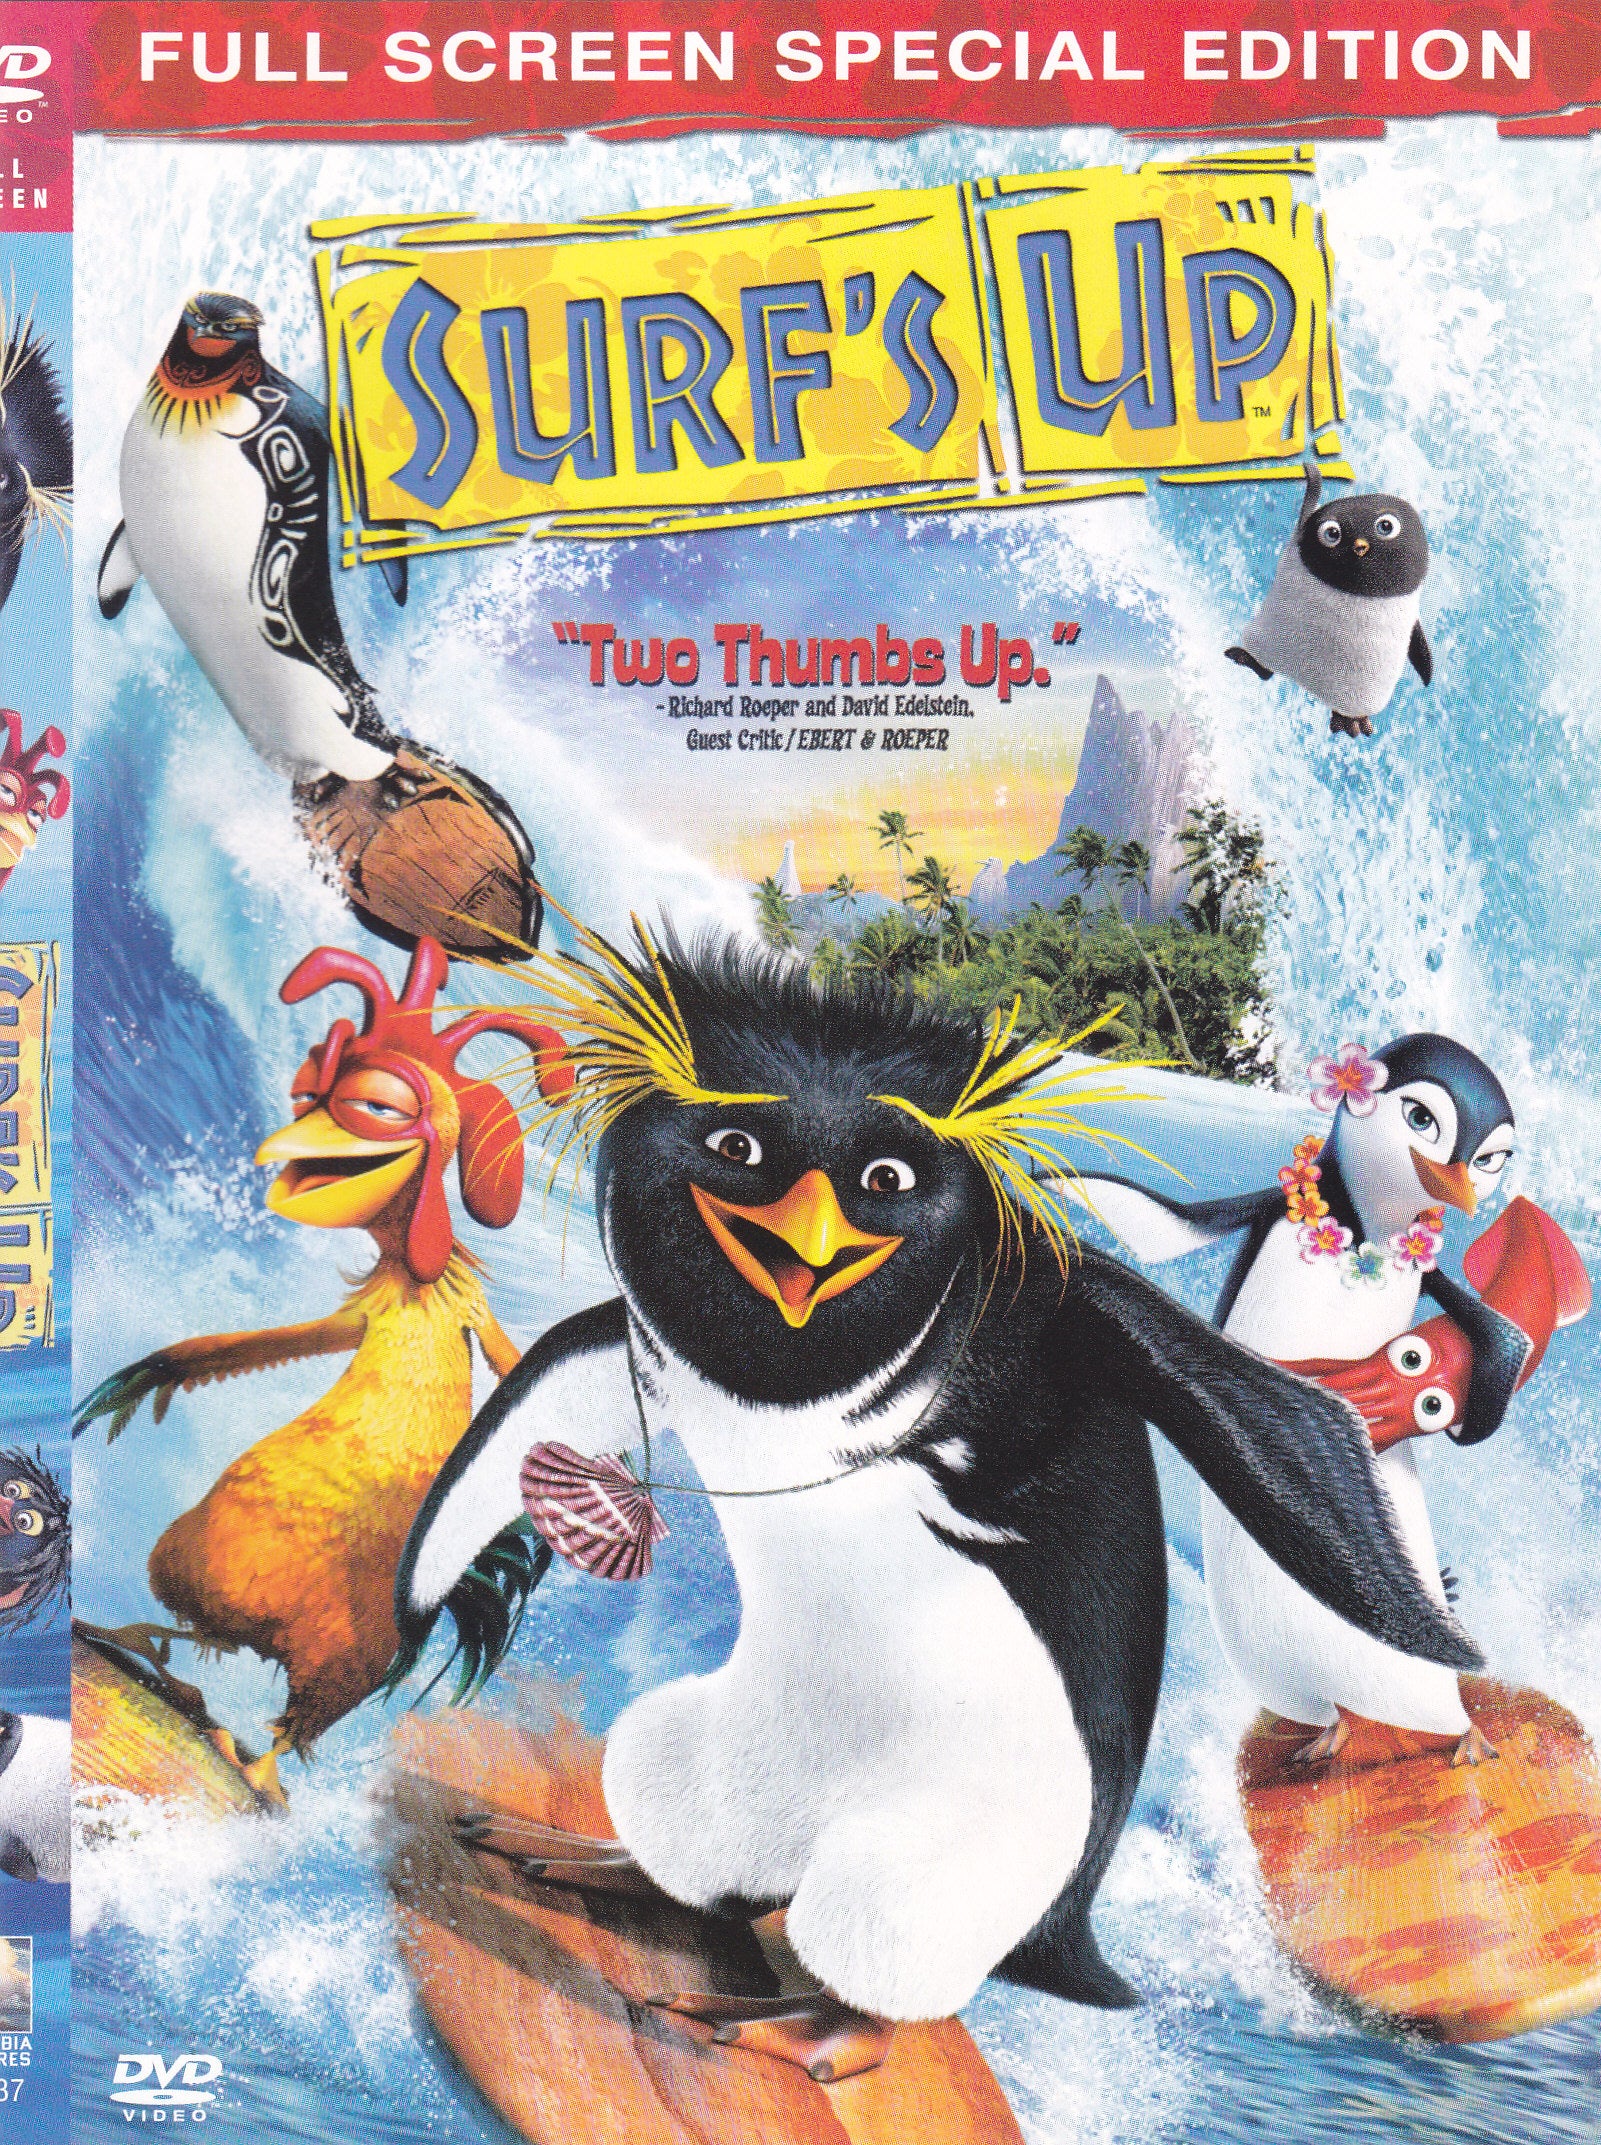 DVD - Surfs Up - Full-Screen Special Edition Movie